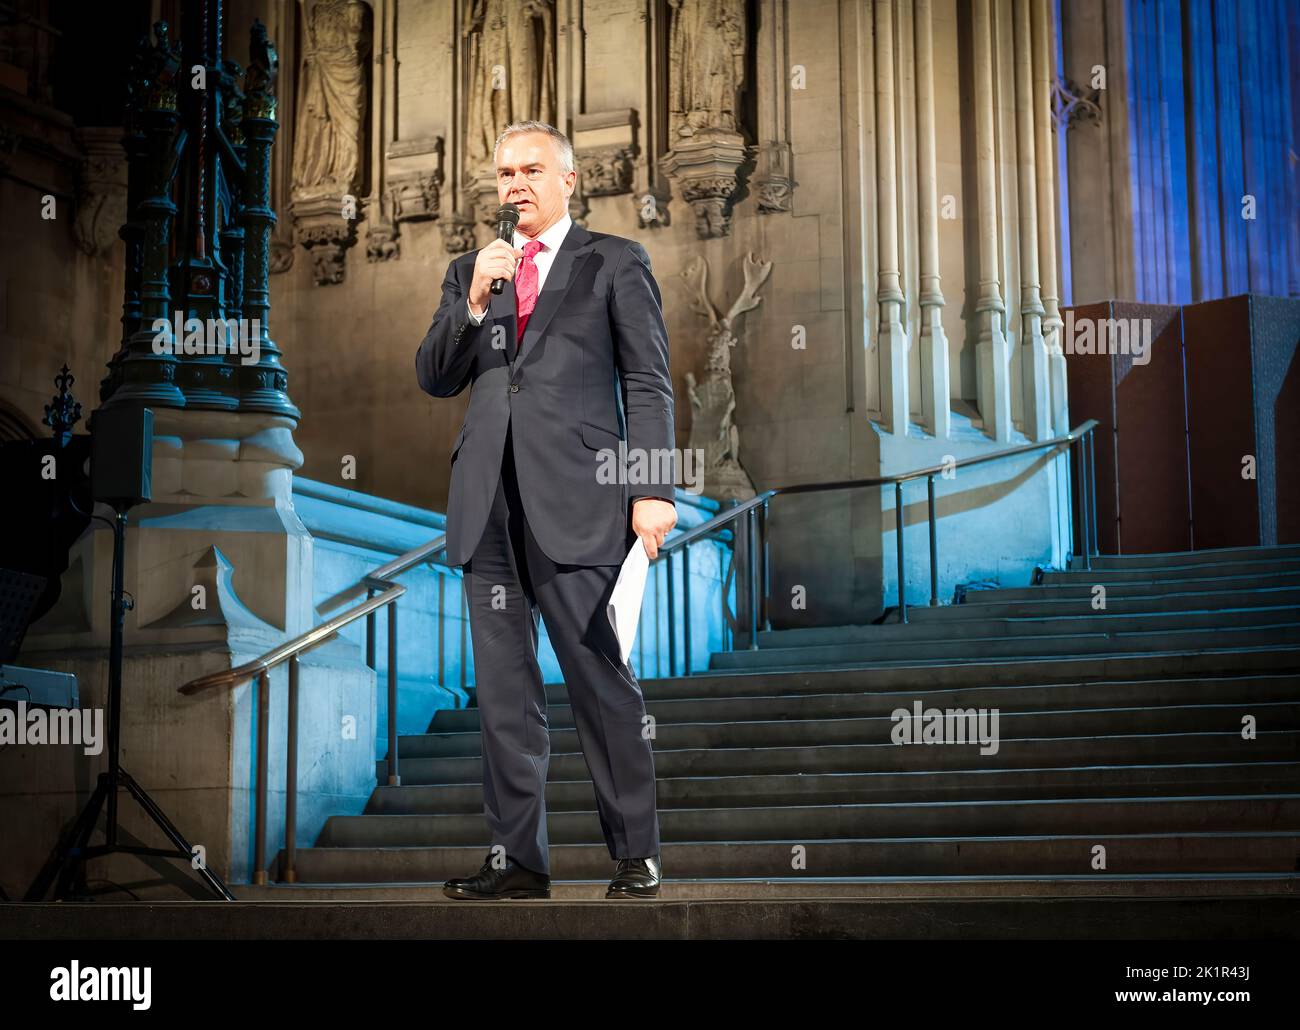 BBC TV News Presenter, Huw Edwards, speaking from the steps of Westminster Hall, London, UK Stock Photo